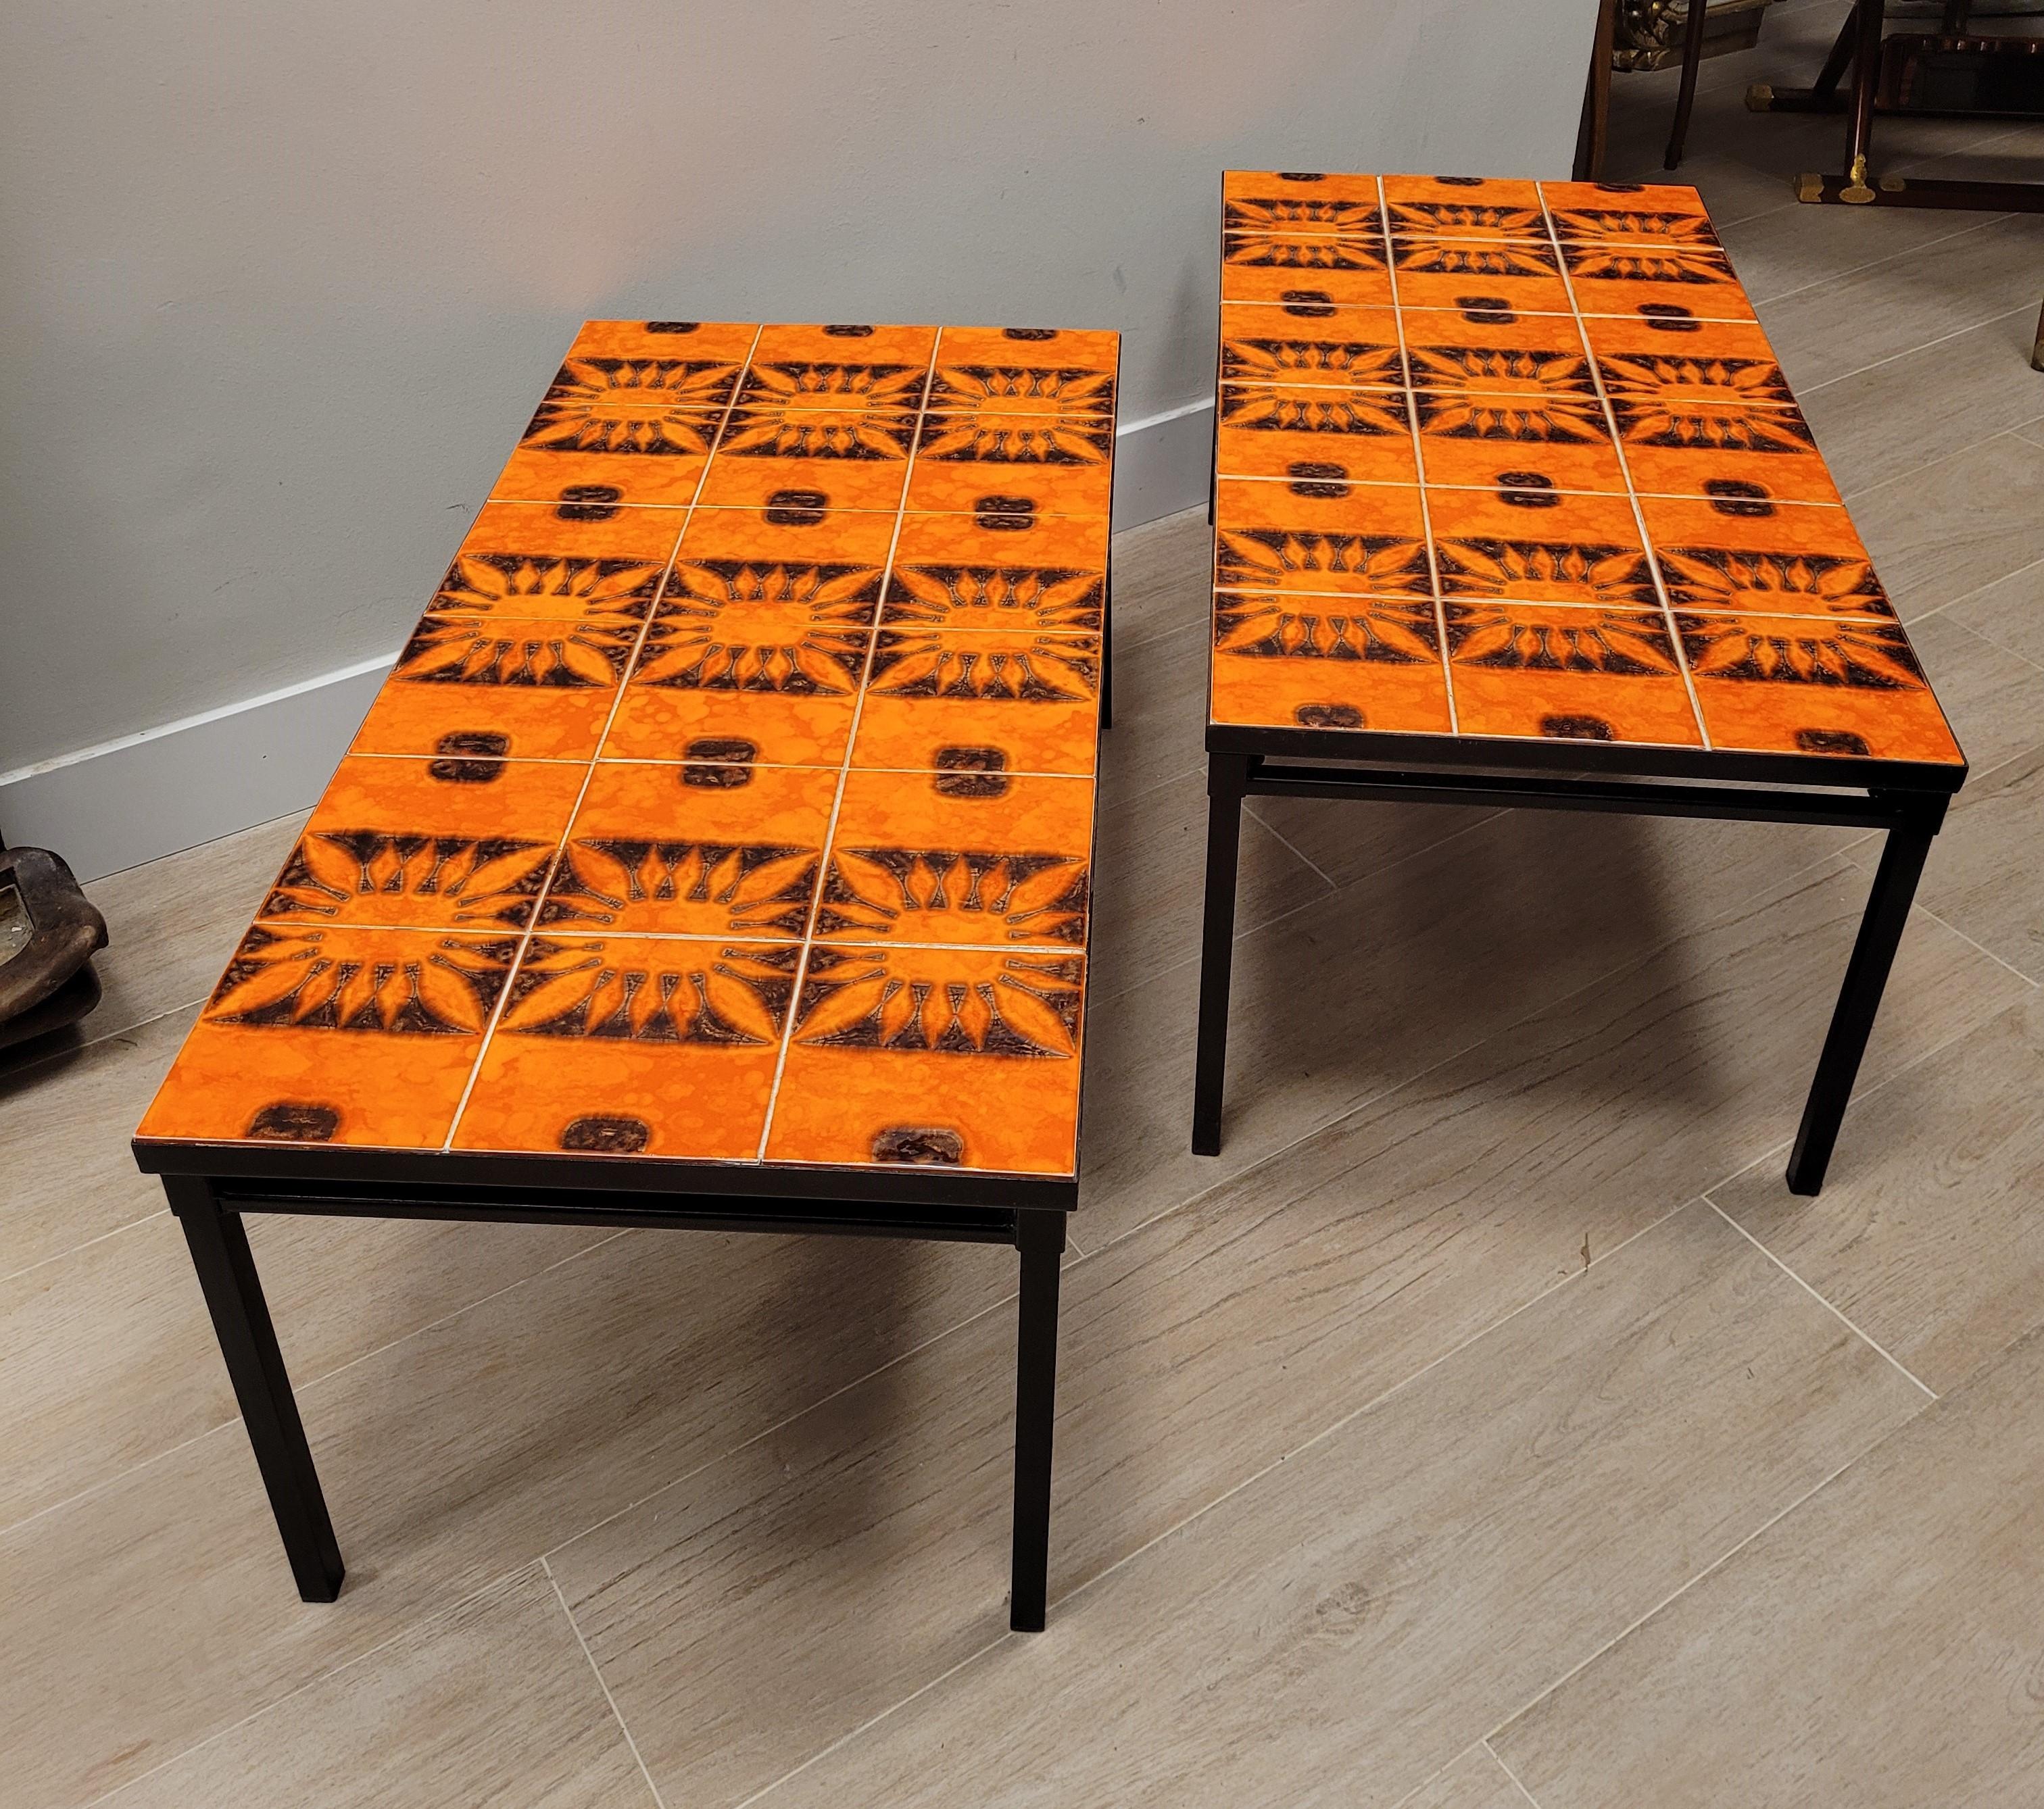 
 
Outstanding pair of rectangular-shaped low tables designed following the spirit and work of Roger Capron in the middle of the last century whose top is made up of ceramic pieces from Vallauris with solar motifs in an intense orange color. The